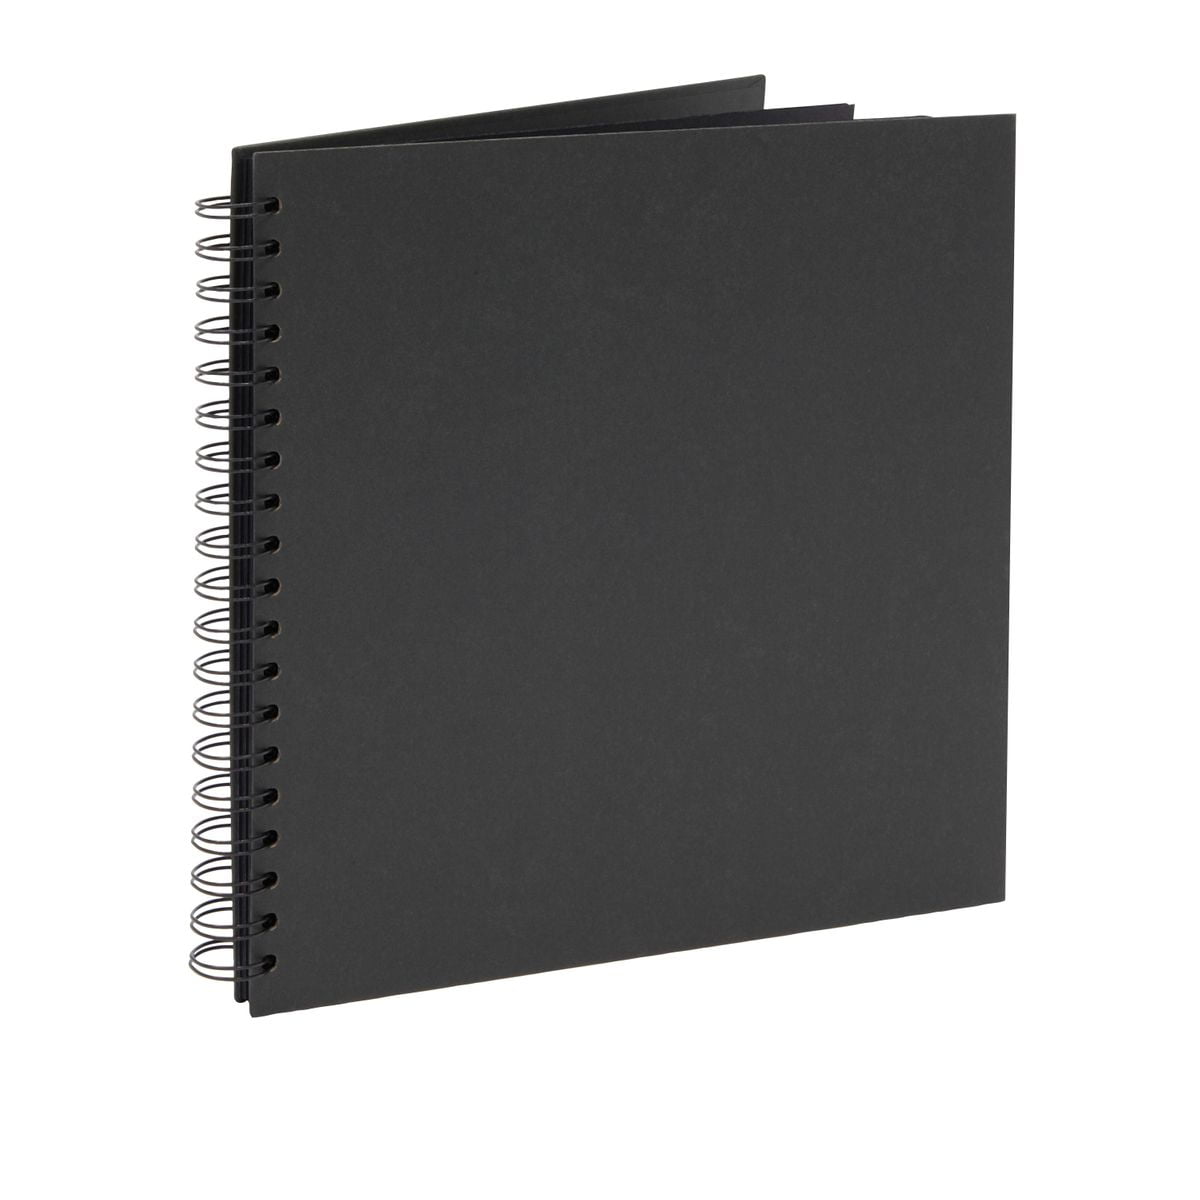 4 1/2 Mini Album-blank Scrapbook-10 Pages or More Bare Chipboard